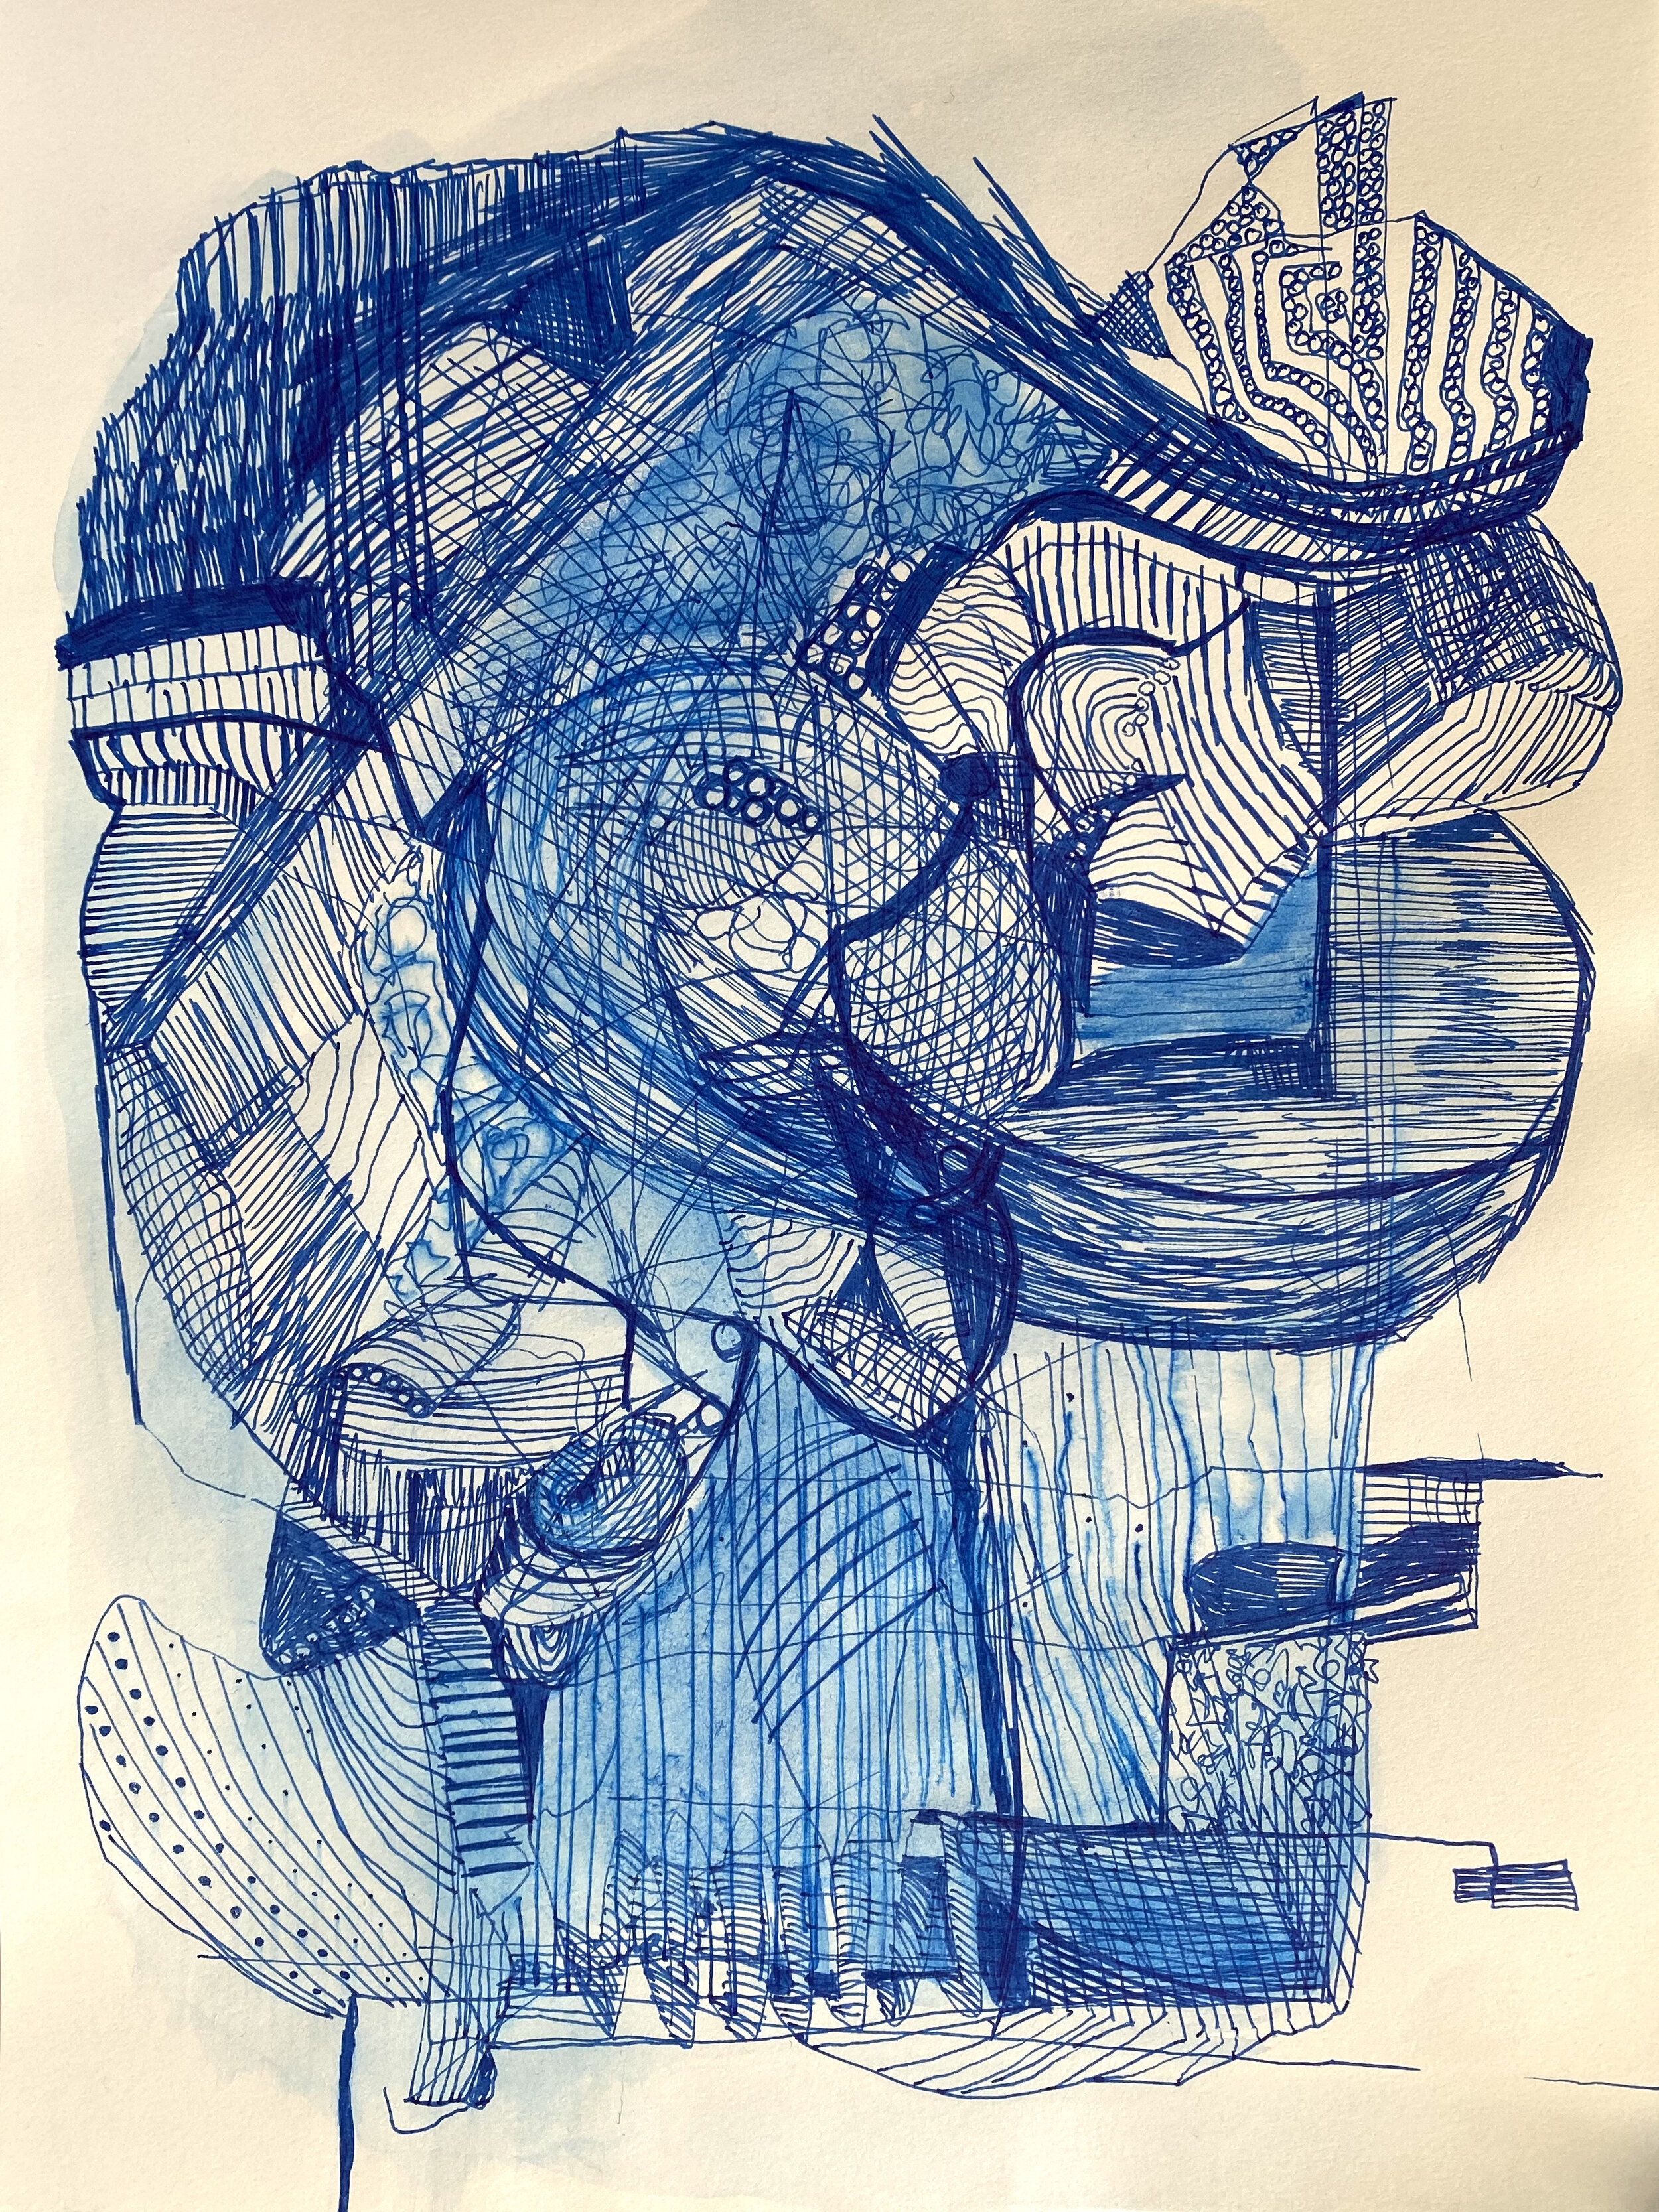 Armchair, 2020. 12x9 inches, blue ink on paper.